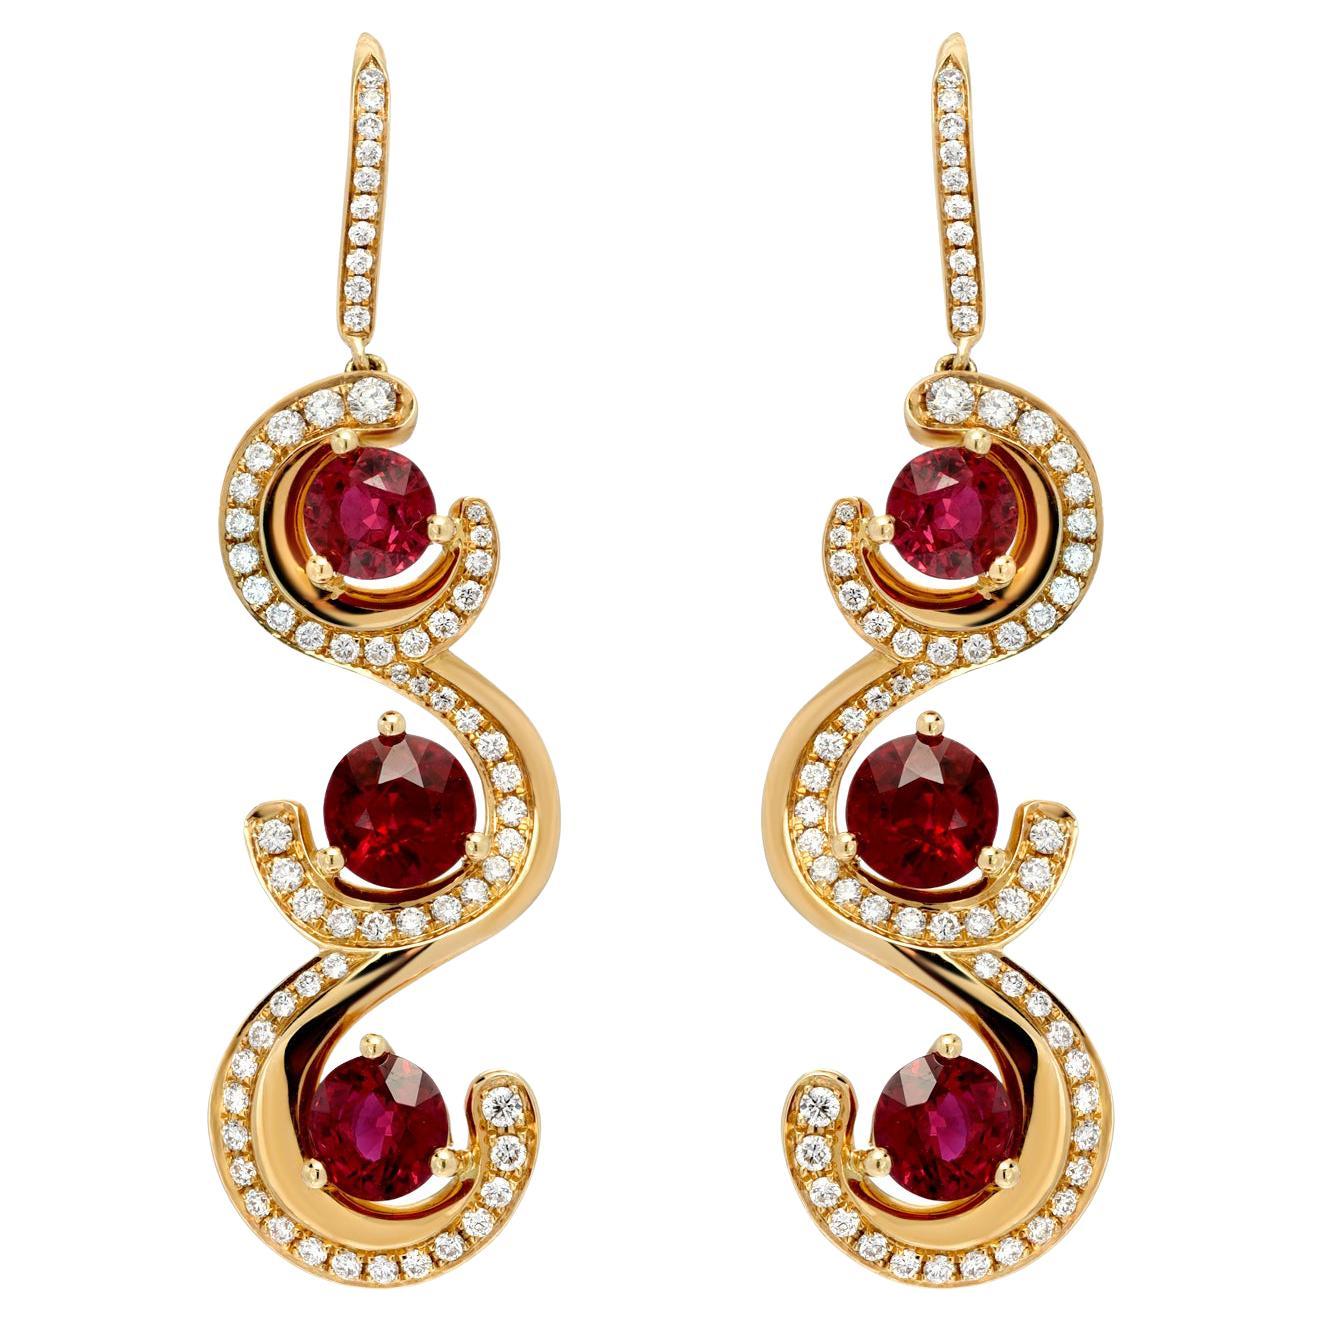 Exceptional Burmese Ruby rounds weighing a total of 7.19 carats, and a total of 1.10 carat round brilliant diamonds are hand set in these spectacular 18K yellow gold earrings. 
Total length - 2 inches
Returns are accepted and paid by us within 7